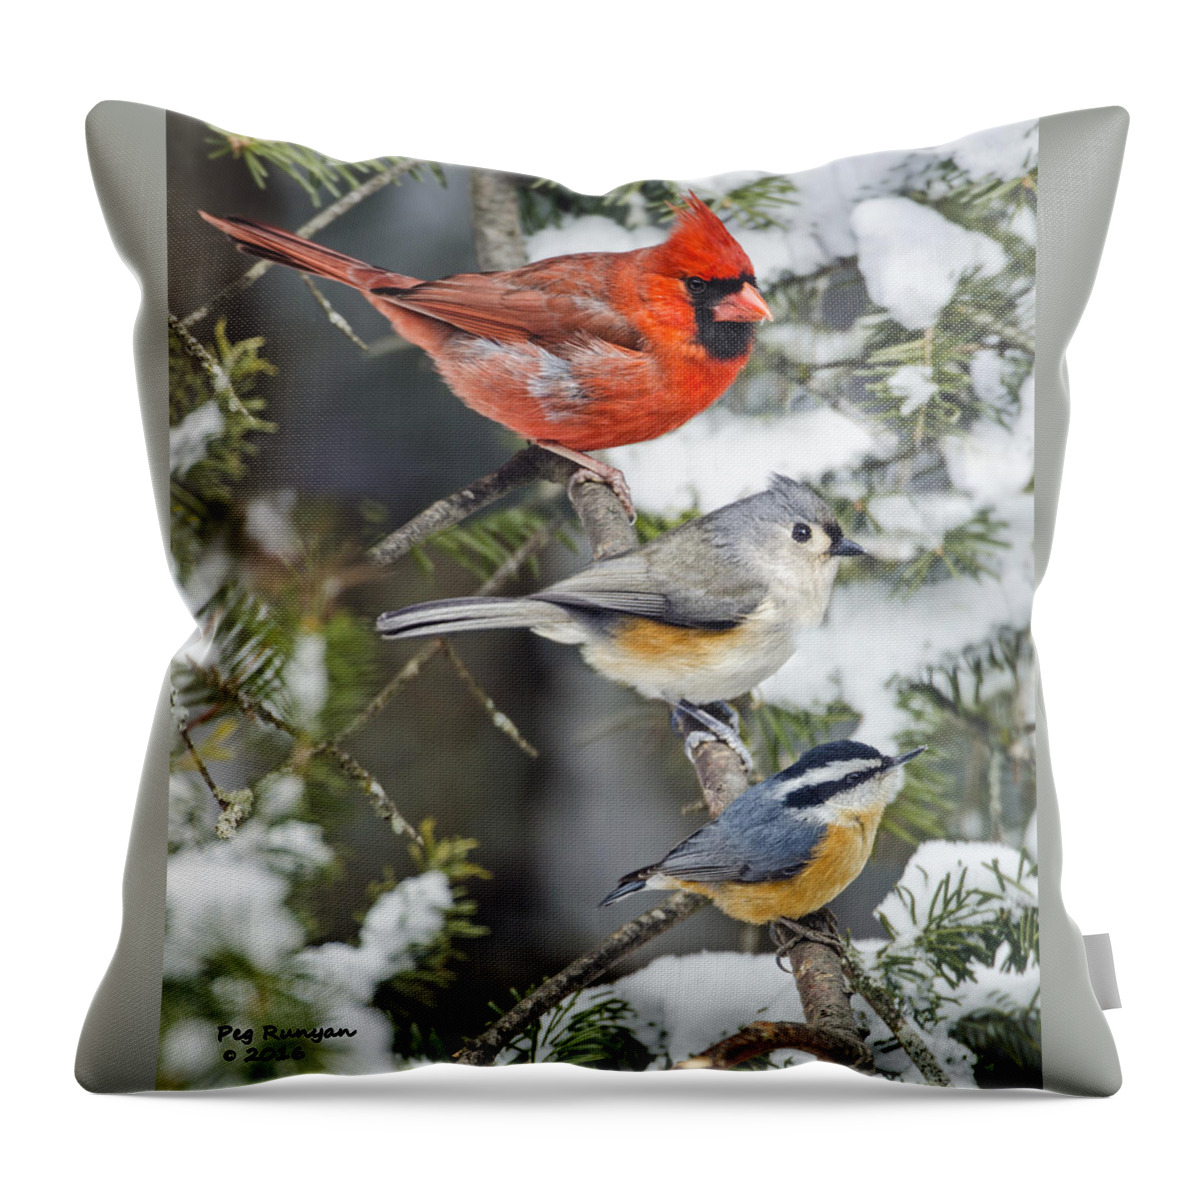 Birds On Snowy Limb Throw Pillow featuring the photograph Birds of a Feather #3 by Peg Runyan